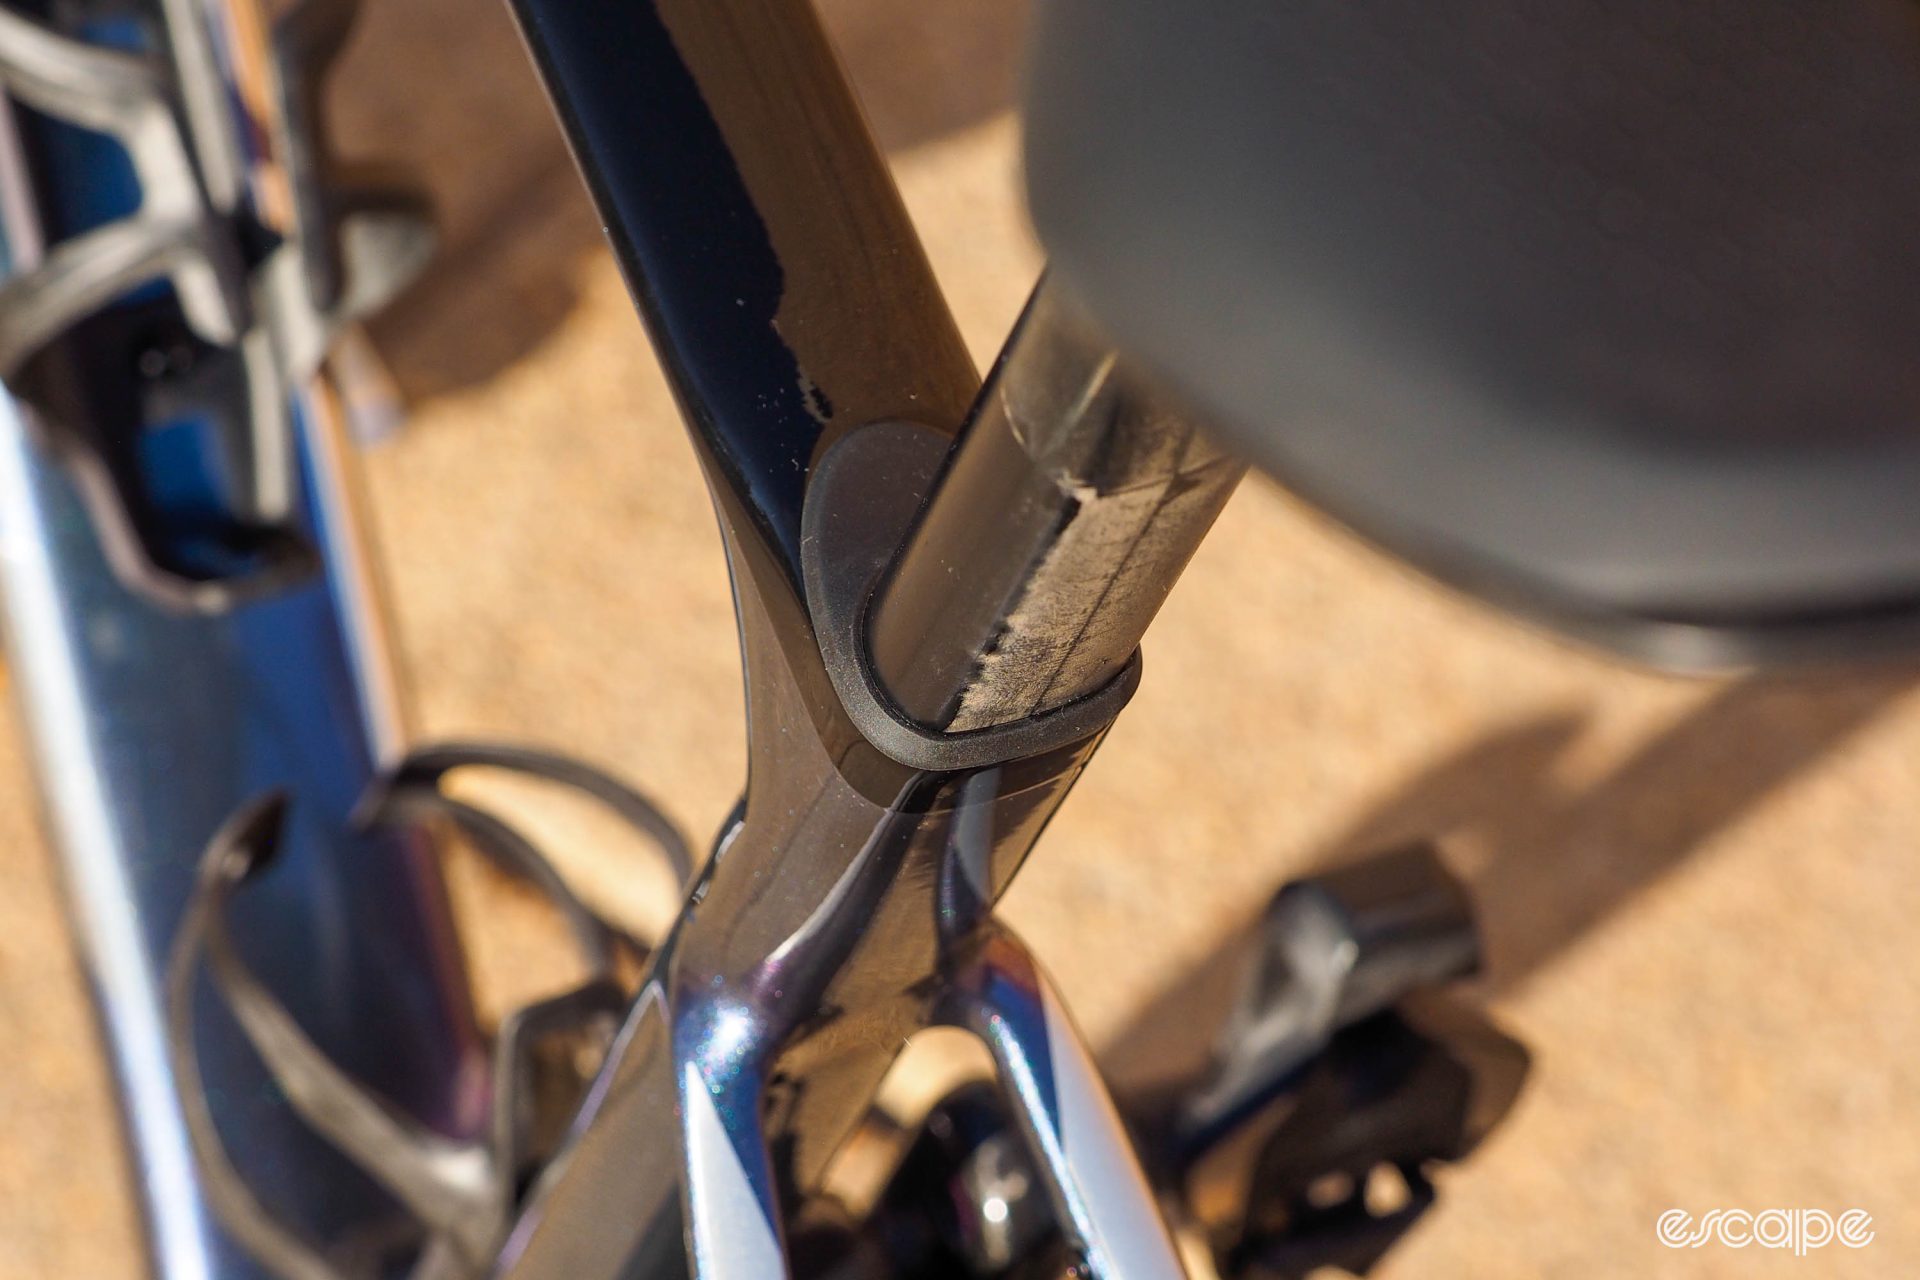 The d-shaped cross section of the D-Fuse seatpost is shown clearly here, with a rubber seal around the seatpost and clamp section.